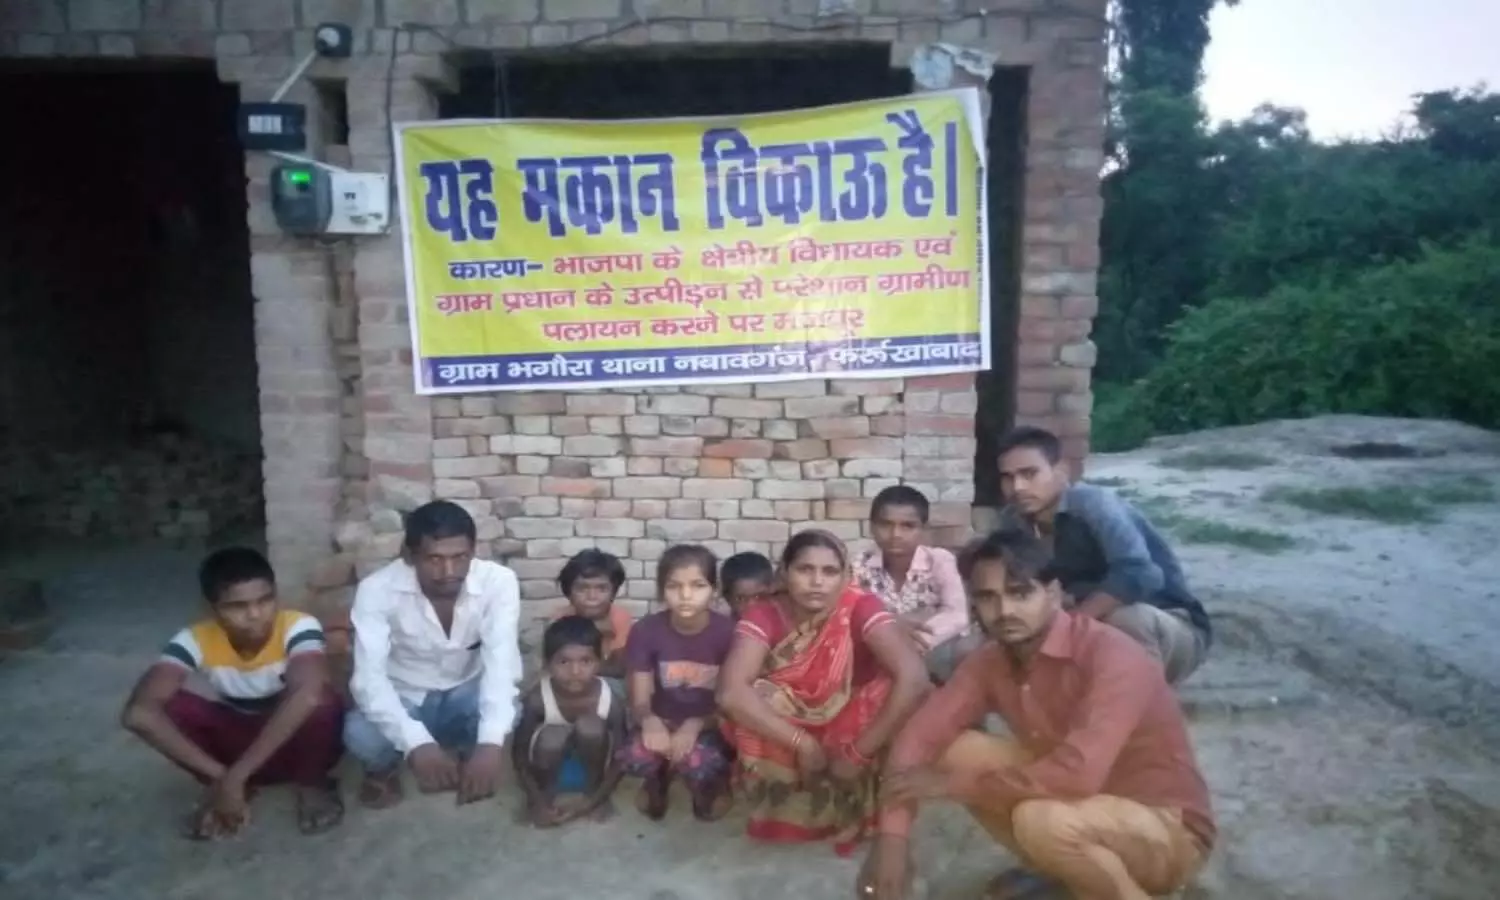 People are migrating from the village, posters of House for sale